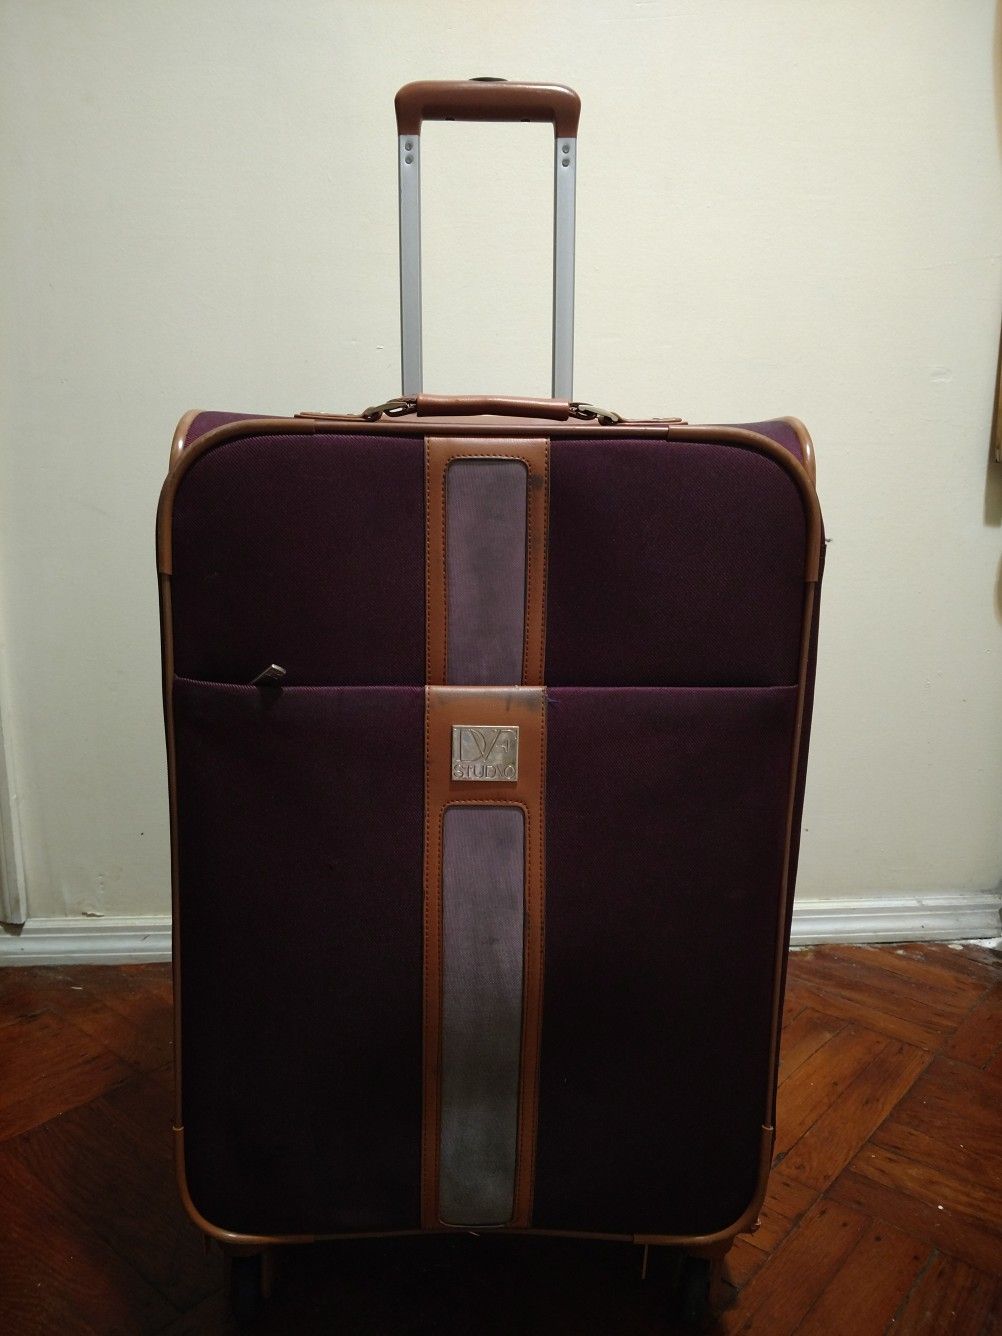 Rolling luggage suitcase